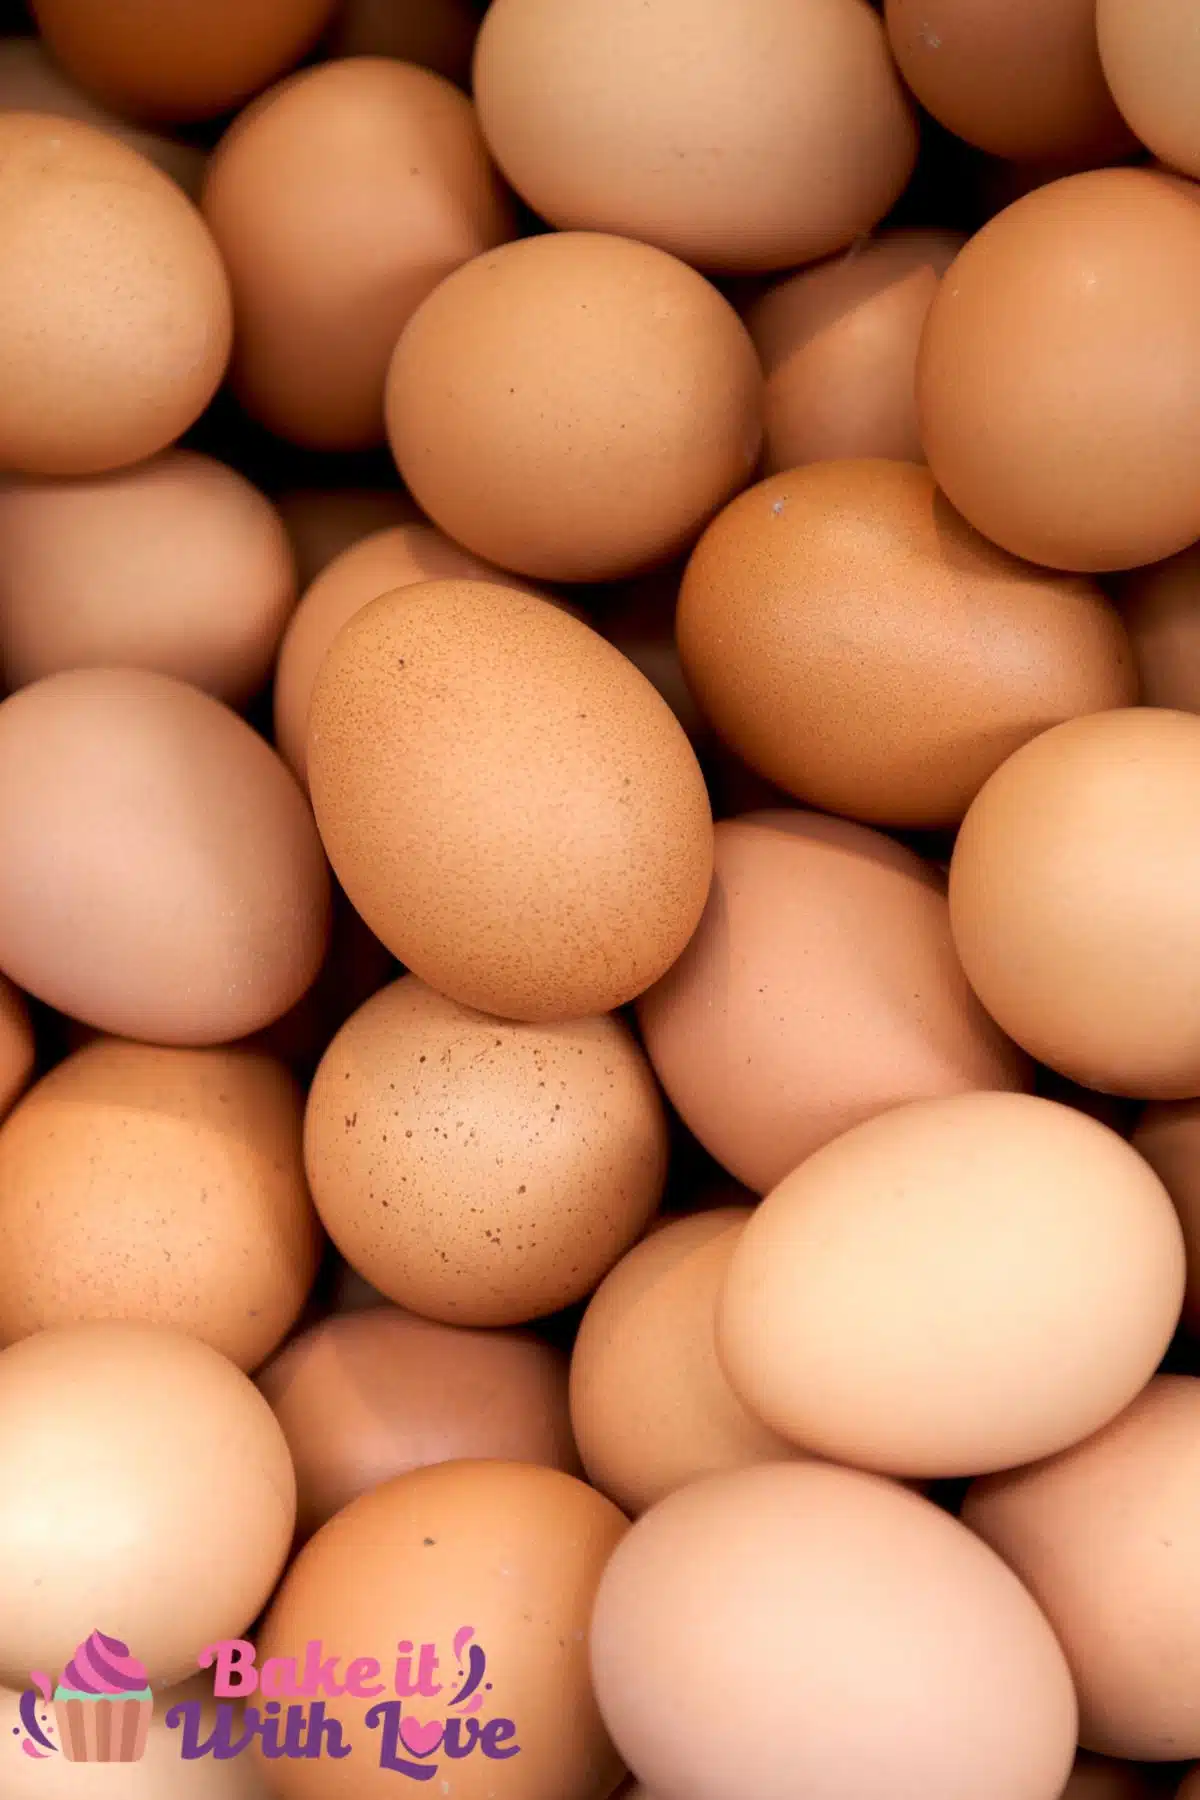 Tall image of eggs.